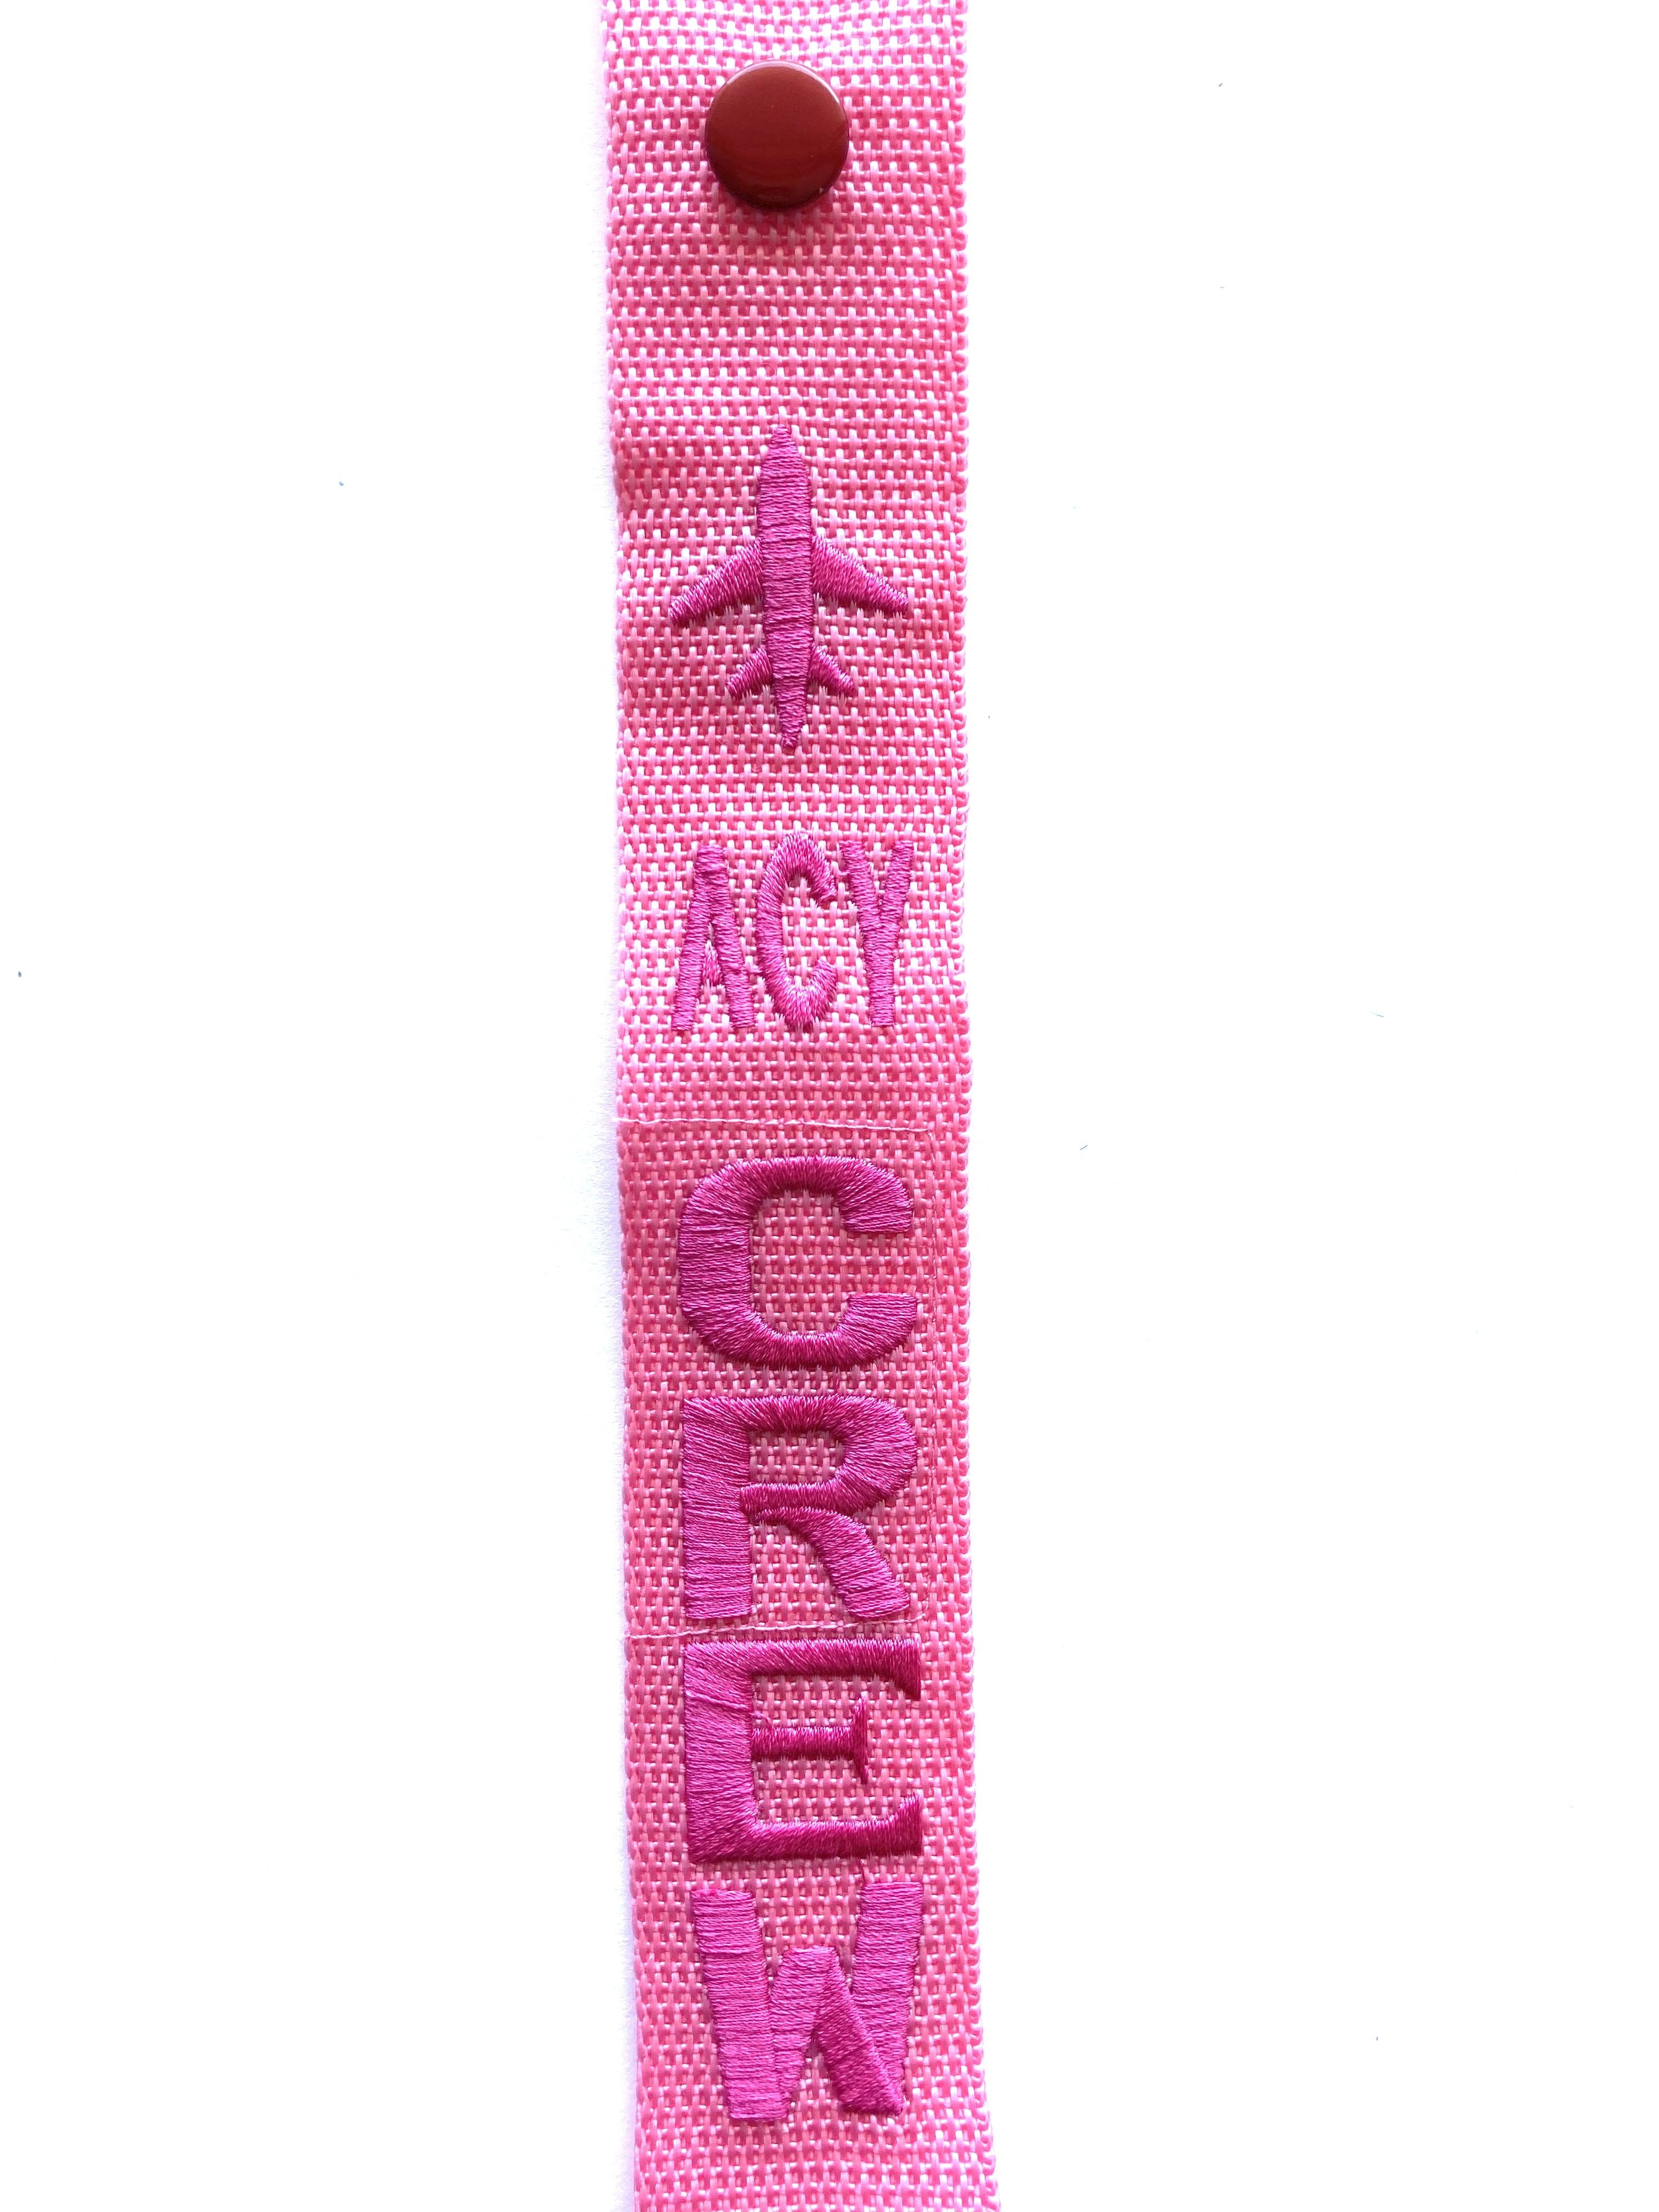 CREW Luggage Tag - ACY Pink on Pink